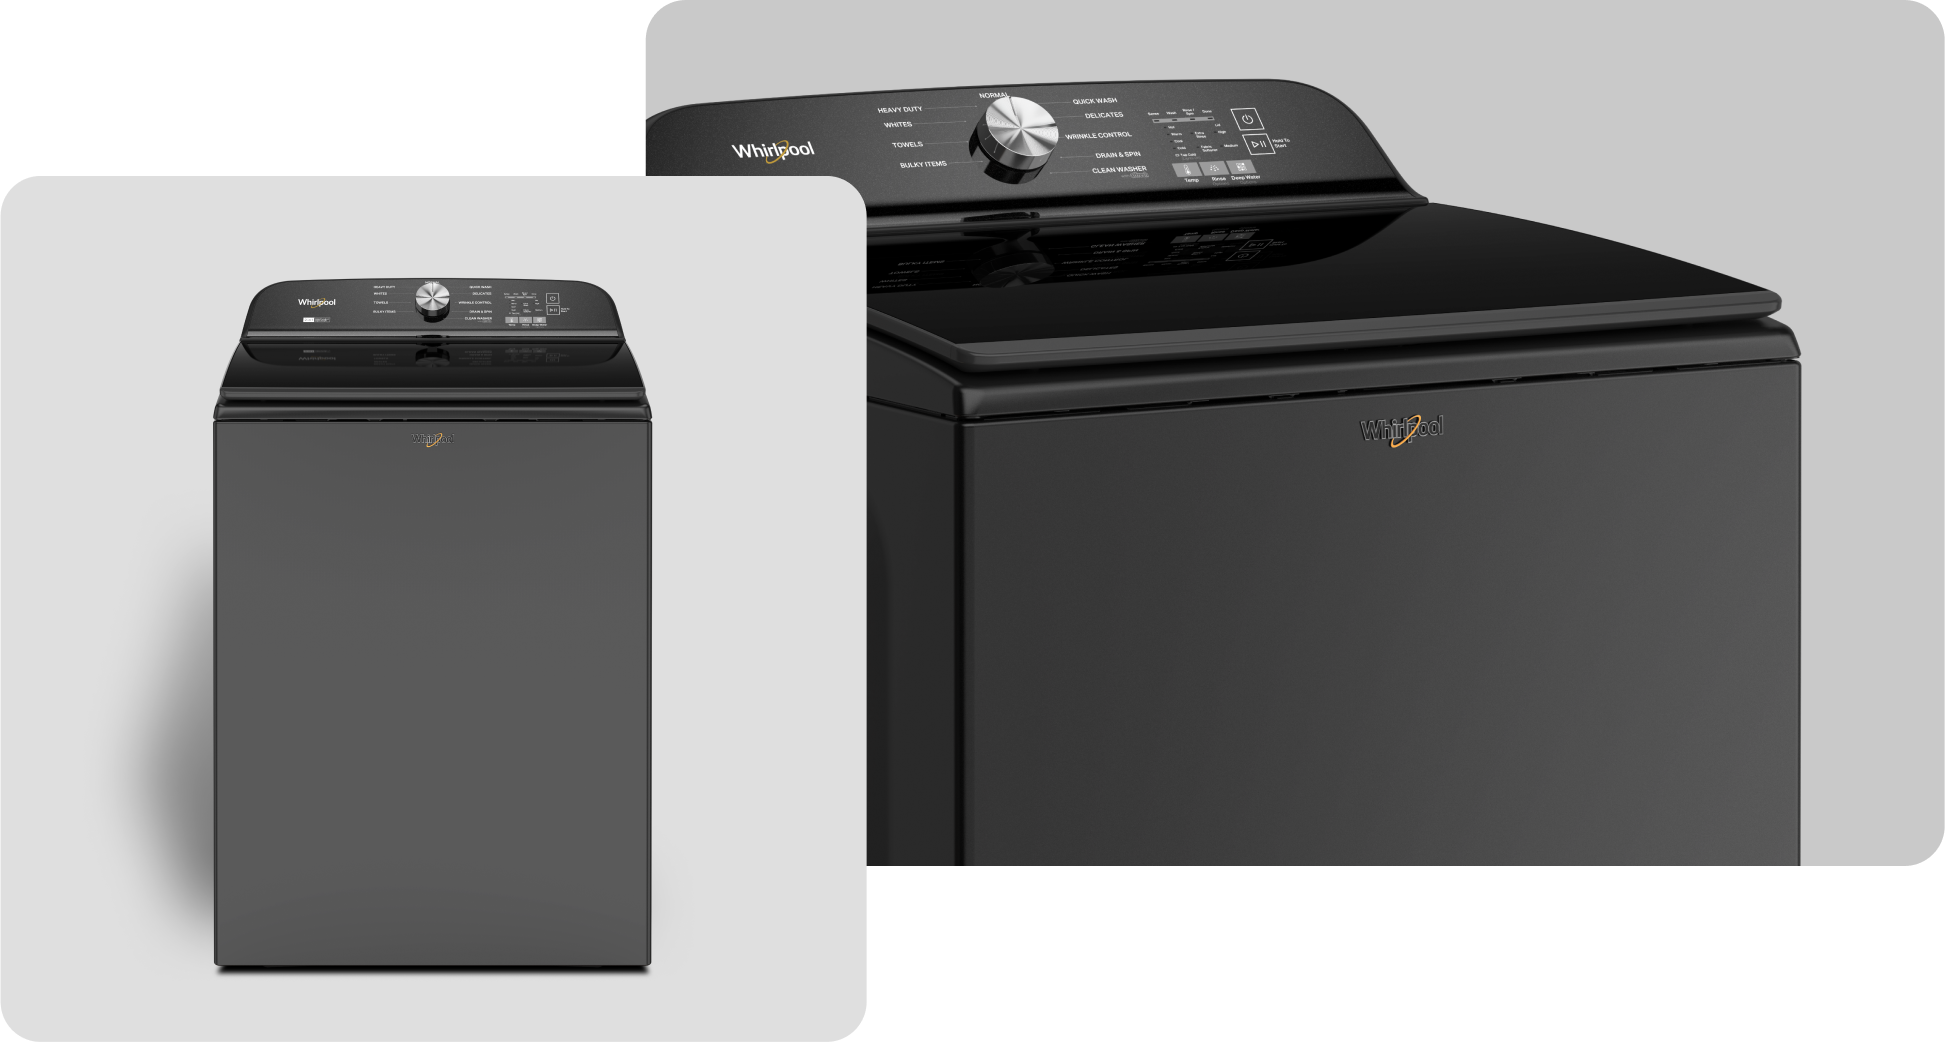 A Whirlpool® Washer with a Volcano Black Finish